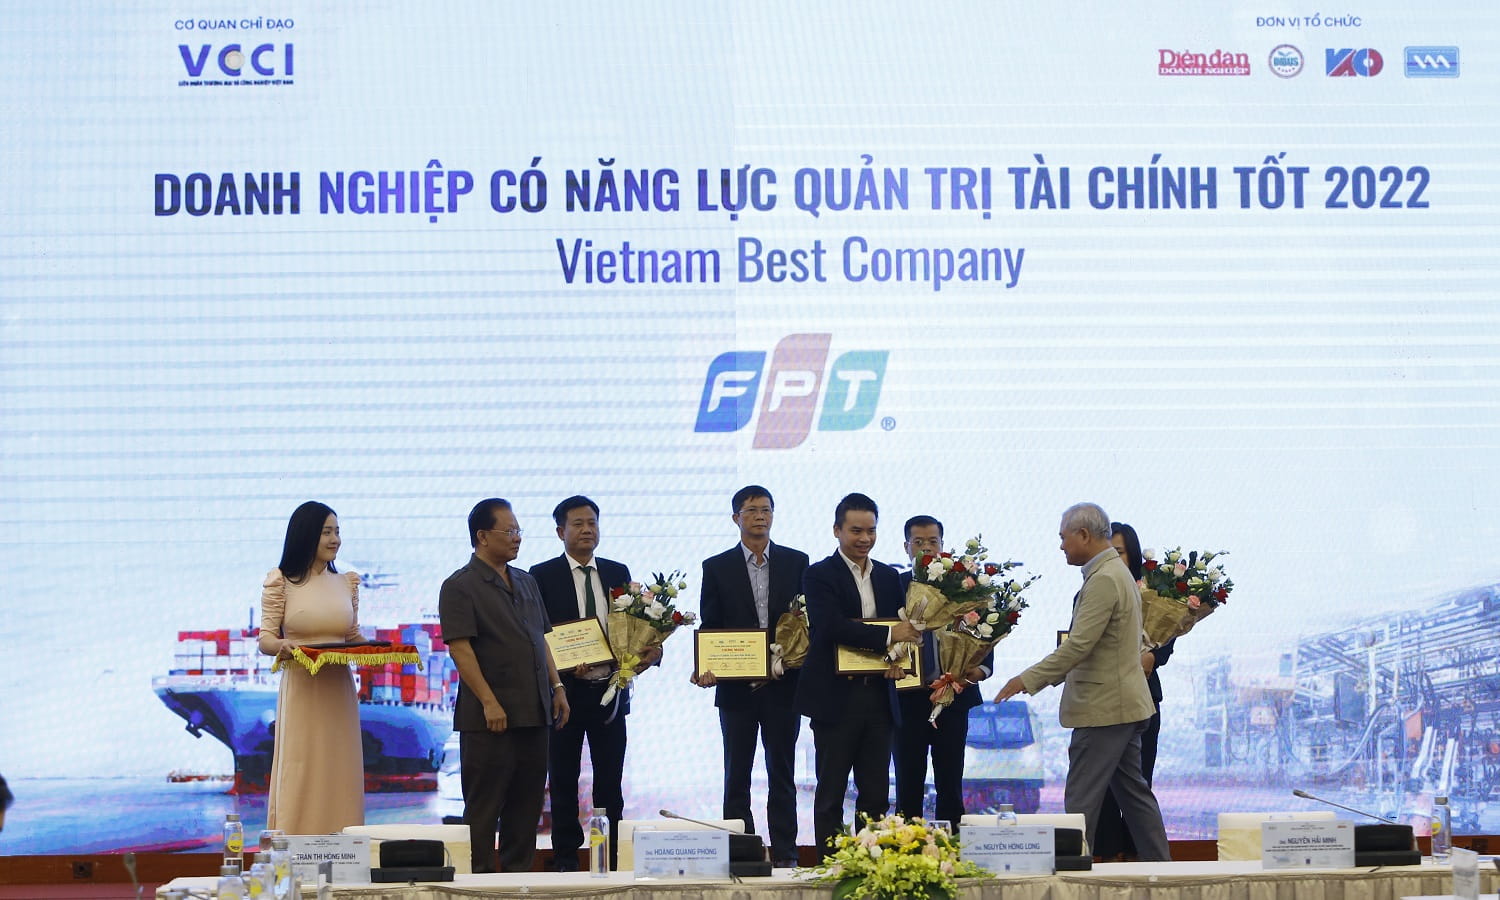 FPT Ranks In the Top 15 Enterprises With Good Financial Management Capacity in 2022 • 17/11/2022 Hanoi, November 17, 2022 - Within the agenda of the 2023 Economic Forum under the theme "Fostering collaboration to overcome challenges", FPT has been honored as one of the listed enterprises with good financial management capacity in 2022. It is the second consecutive year of FPT to be named on the list, along with large corporates in other sectors, such as Vietnam National Petroleum Group, Vinamilk, and Masan,... Moreover, FPT is the only technology firm to be recognized.  FPT is the only technology corporation to rank among the Top 15 enterprises with good financial management capacity FPT has maintained high, stable growth momentum in 2022 with strategic orientations of real-time, customer-centric, and data-driven governance and technology solution development. In the first ten months of 2022, the Corporation's revenue and profit before tax reached VND 35,105 billion and VND 6,456 billion, respectively, growing 24.4% and 24% compared to the same period last year. Net profit attributable to shareholders of the parent company and EPS reached VND 4,550 billion and VND 4,158, up 30.7% and 30%, respectively. Due to the strategy of developing new high-value-added products and services as well as promoting digital transformation for operating cost optimization, FPT's profit margin improved to 15.7%. In particular, in the context of economic and political instability globally, FPT has maintained high growth in key markets such as Japan, the US, and Asia Pacific (APAC). In particular, FPT's foreign revenue reached VND 15,249 billion, equivalent to a 30% increase, in the first ten months of this year. Of which, the US market grew by 46%, APAC rose by 46.6%, and Japan increased by 26.4% (in original currencies). During the past three decades, FPT has demonstrated its leadership with the ability to manage risks and seize opportunities to get positive business results, contributing to the development of the national economy. Besides accompanying businesses in accelerating digital transformation, FPT has also transformed itself thoroughly. Specifically, the Corporation has widely applied new technologies to its management and operation toward a digital, real-time,data-driven enterprise model. In particular, the FPT Data Lake project, launched in 2020, has helped corporate executives manage, access, and export business information immediately to make accurate real-time decisions, catching up with market development and demand. As the first IT company listed on the Ho Chi Minh City Stock Exchange (HoSE) in 2006, FPT has constantly improved its governance practice in accordance with international standards and maintained information transparency. The Corporation always ensures to disclose information fully, transparently, precisely, and on time as prescribed by law. All related parties can access disclosed information on the Corporation's website. In addition, FPT also proactively provides helpful information to help investors better understand the ICT sector and FPT's operations, including IT market trends, macro/micro economic factors affecting the industry, as well as the strategic orientations, plans, and business results of the Corporation. Monthly and quarterly business results reports or information on business orientation and strategy are also delivered to shareholders and investors through mass media or periodic meetings, in-depth seminars, etc. According to the Sustainable Development assessment results by HoSE, FPT always scores a maximum of 100% on ensuring the role of stakeholders and information disclosure and transparency. The 2022 Enterprise Performance Evaluation program is jointly implemented by the Vietnam Business Forum (VBF) Magazine in collaboration with the Institute of Business Studies and Development (INBUS), Vietnam Association of Accountants and Auditors (VAA), Vietnam Association of Corporate Directors (VACD). It is held annually to evaluate the business performance of more than 1,500 enterprises listed on three Vietnamese stock exchanges through annual public financial statements with 21 specific criteria. The examined indicators include revenue, profit, working capital turnover, quick ratio, inventory turnover, interest coverage ratio, fixed asset turnover ratio, EPS, tax indicators, contributions to the State budget, sales and marketing indicators, human resource & organizational performance, and corporate governance indicators. Those will help explore companies' health and governance capacity.